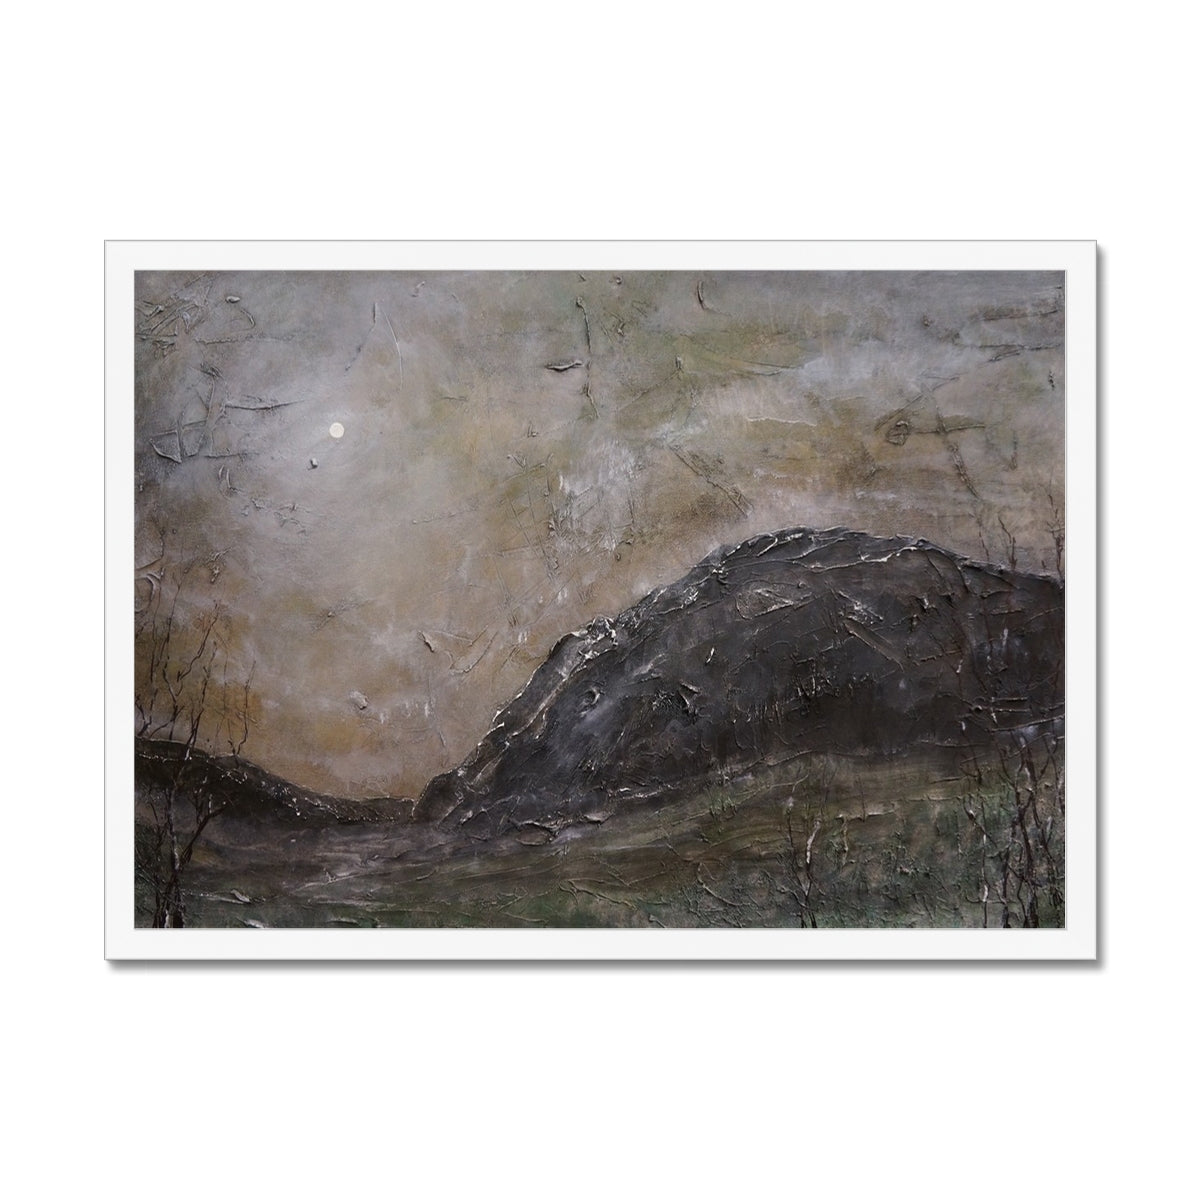 Glen Nevis Moonlight Painting | Framed Prints From Scotland-Framed Prints-Scottish Lochs & Mountains Art Gallery-A2 Landscape-White Frame-Paintings, Prints, Homeware, Art Gifts From Scotland By Scottish Artist Kevin Hunter